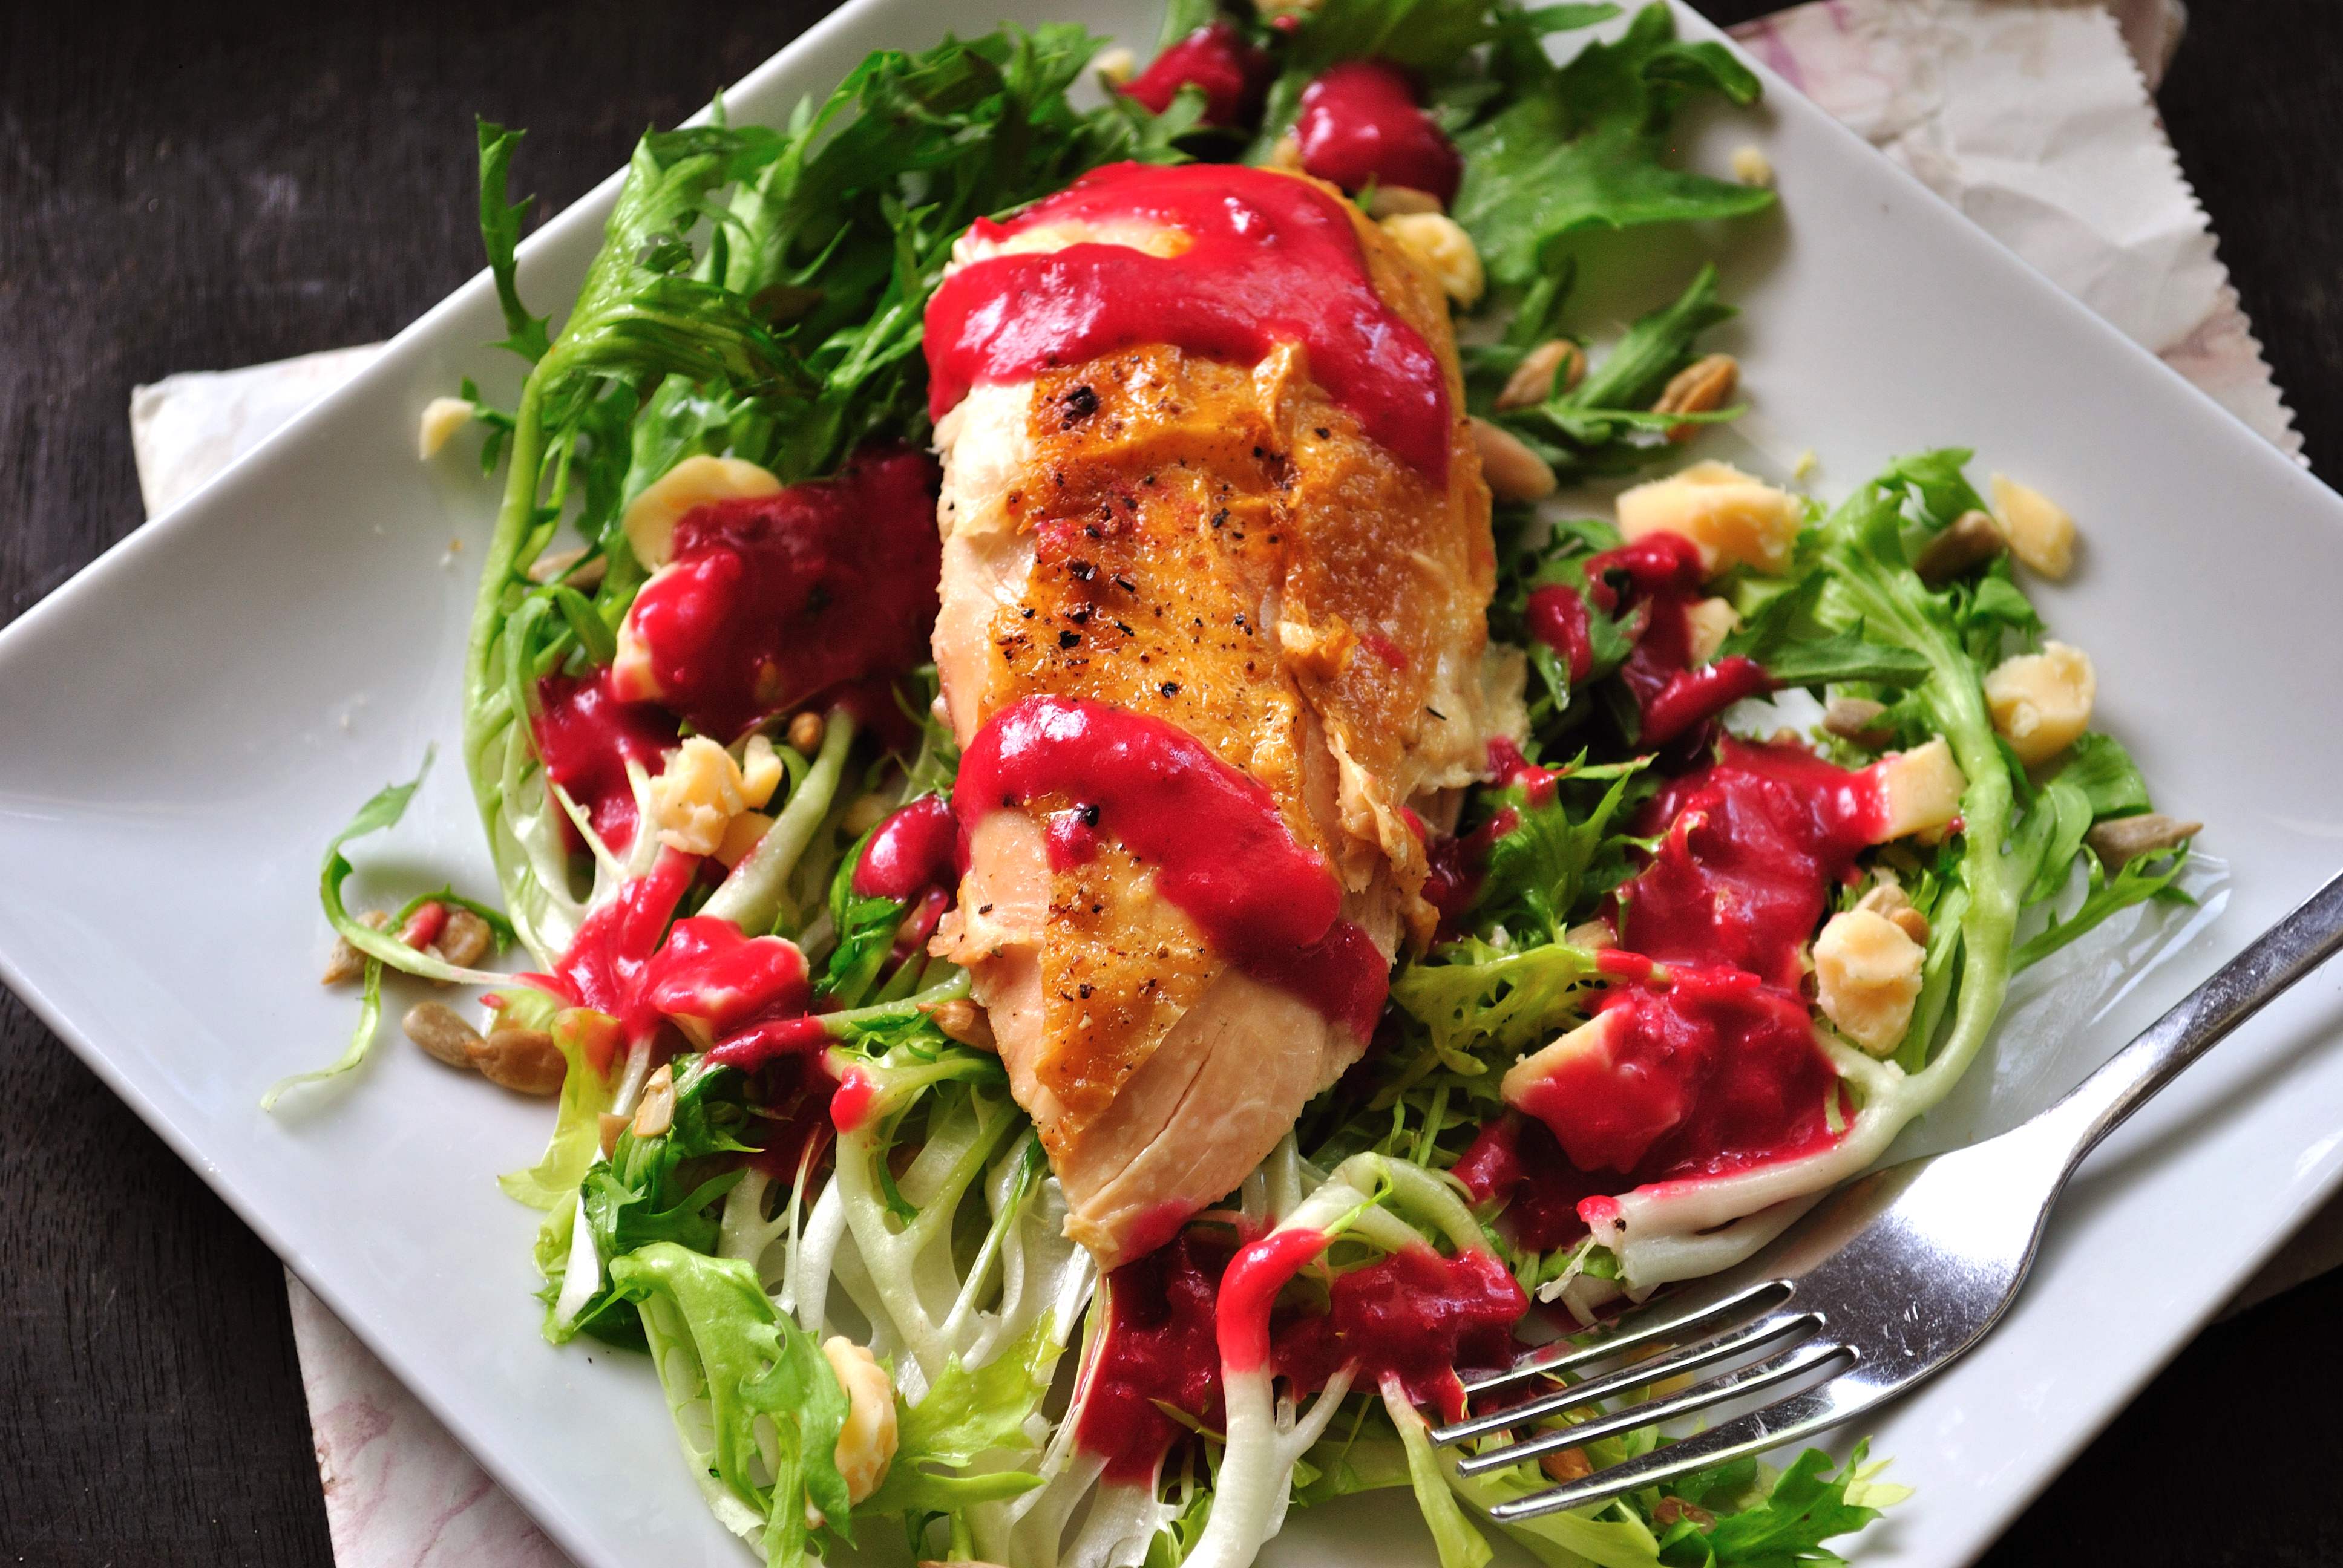 Roasted Chicken & Frisee Salad with Cranberry Vinaigrette